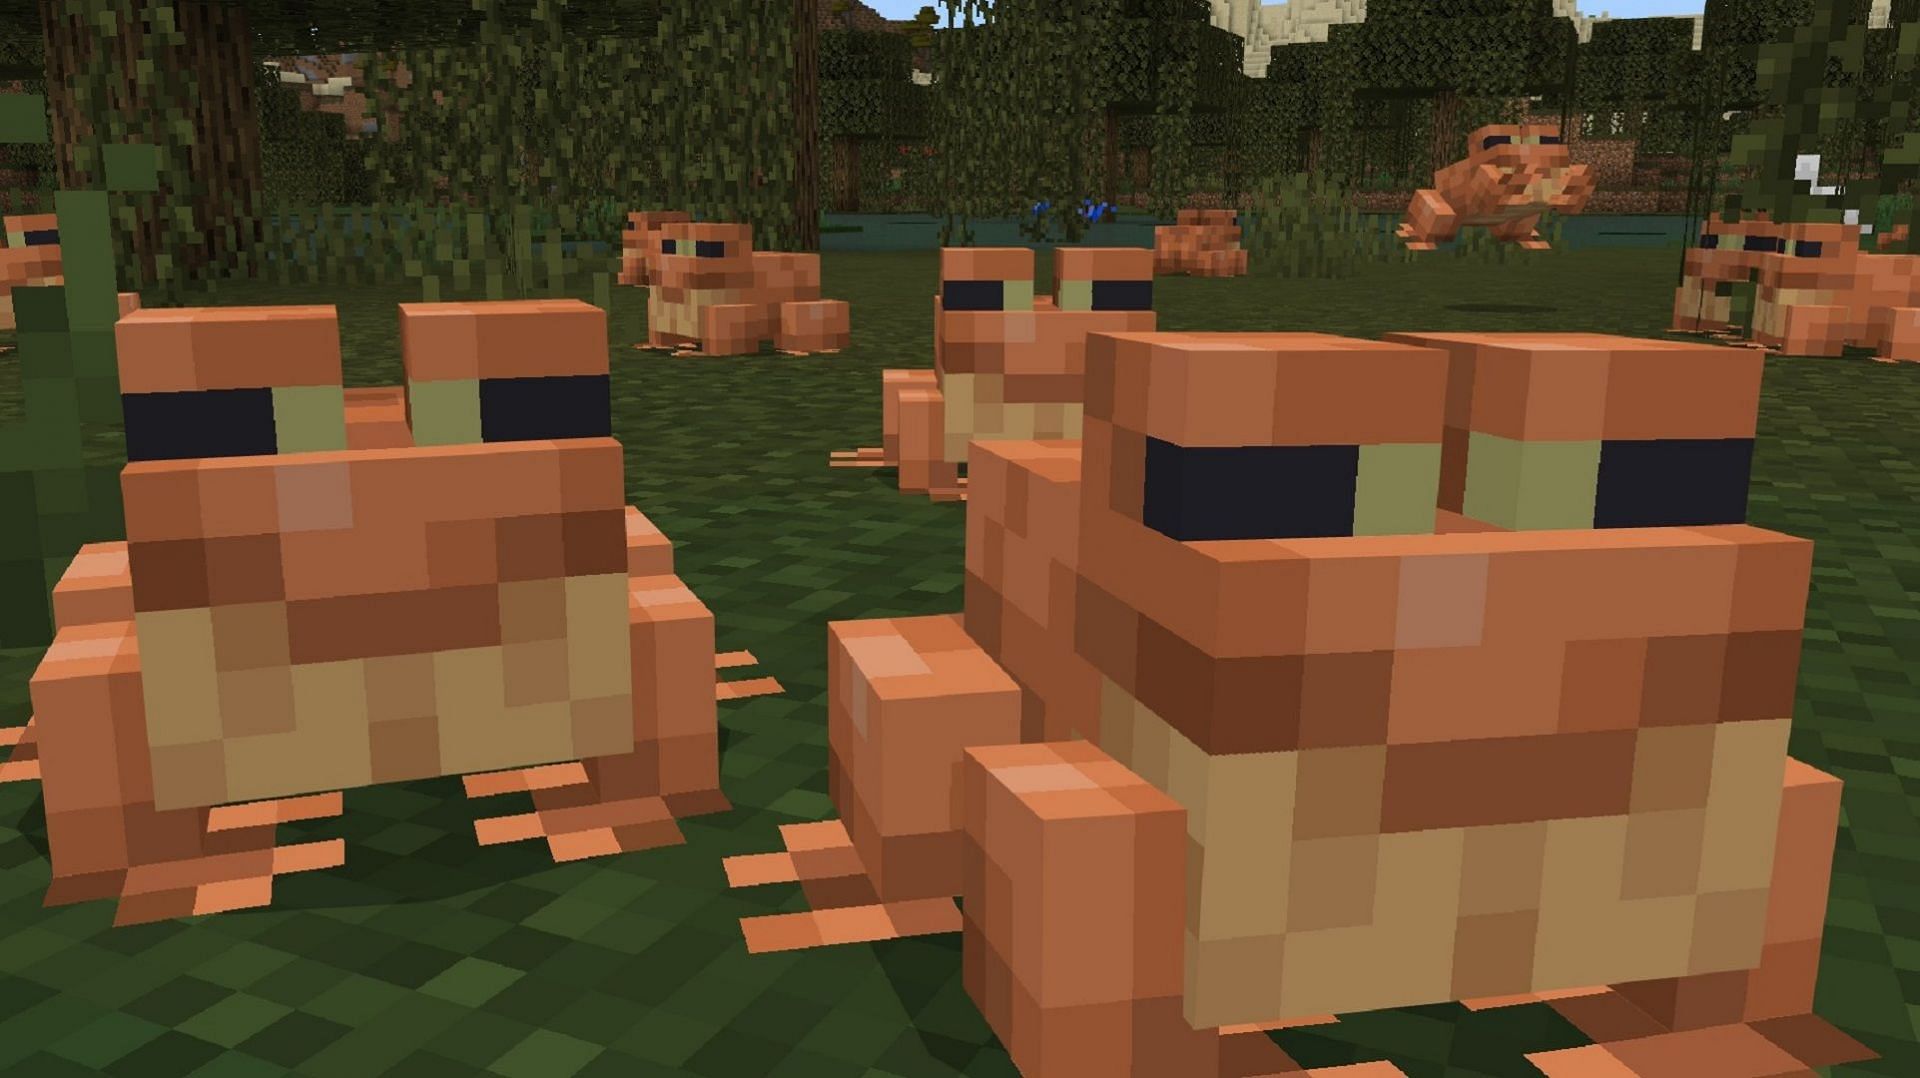 Frogs can breed quite quickly in Minecraft with the right resources on hand (Image via Mojang)